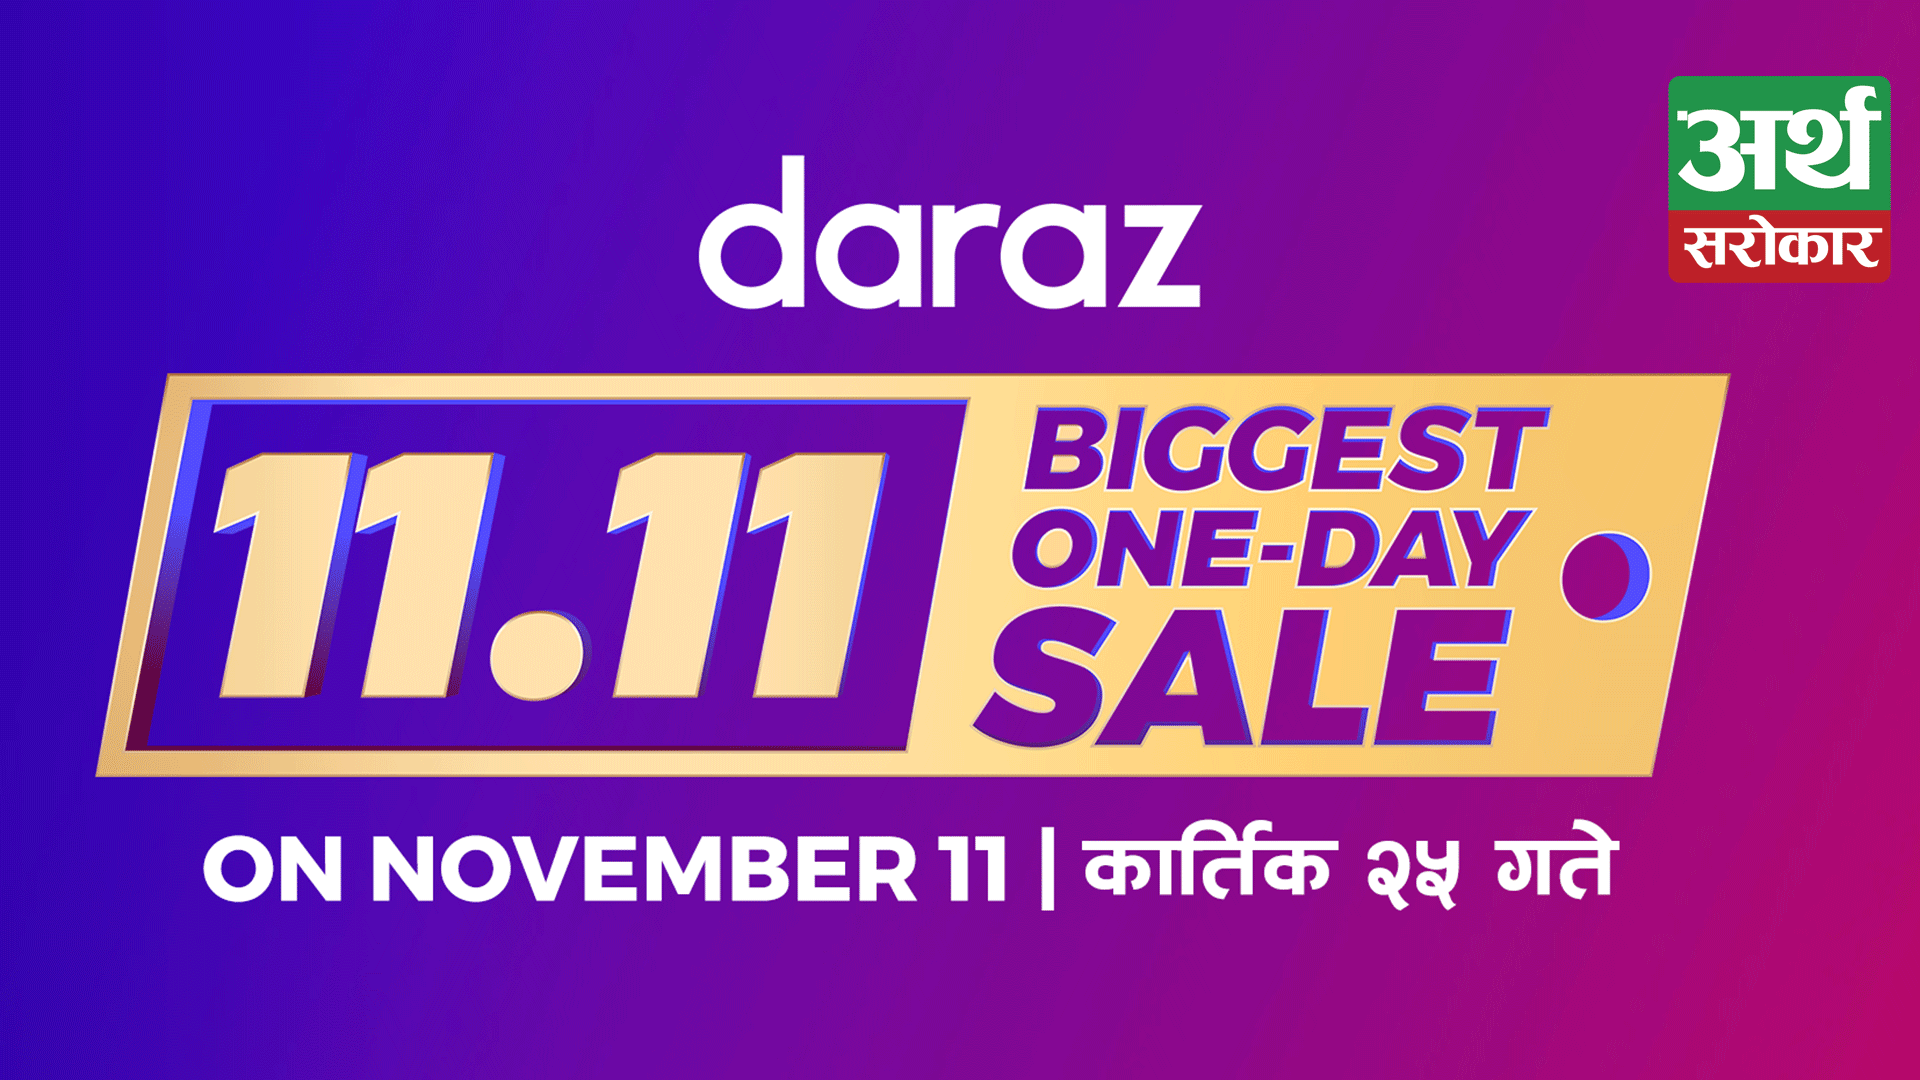 Daraz Gears Up For 11.11 With 1400+ New Recruits, 5 Crore Worth Discounts, 11 lakh Products, & 7 Logistics Partners  